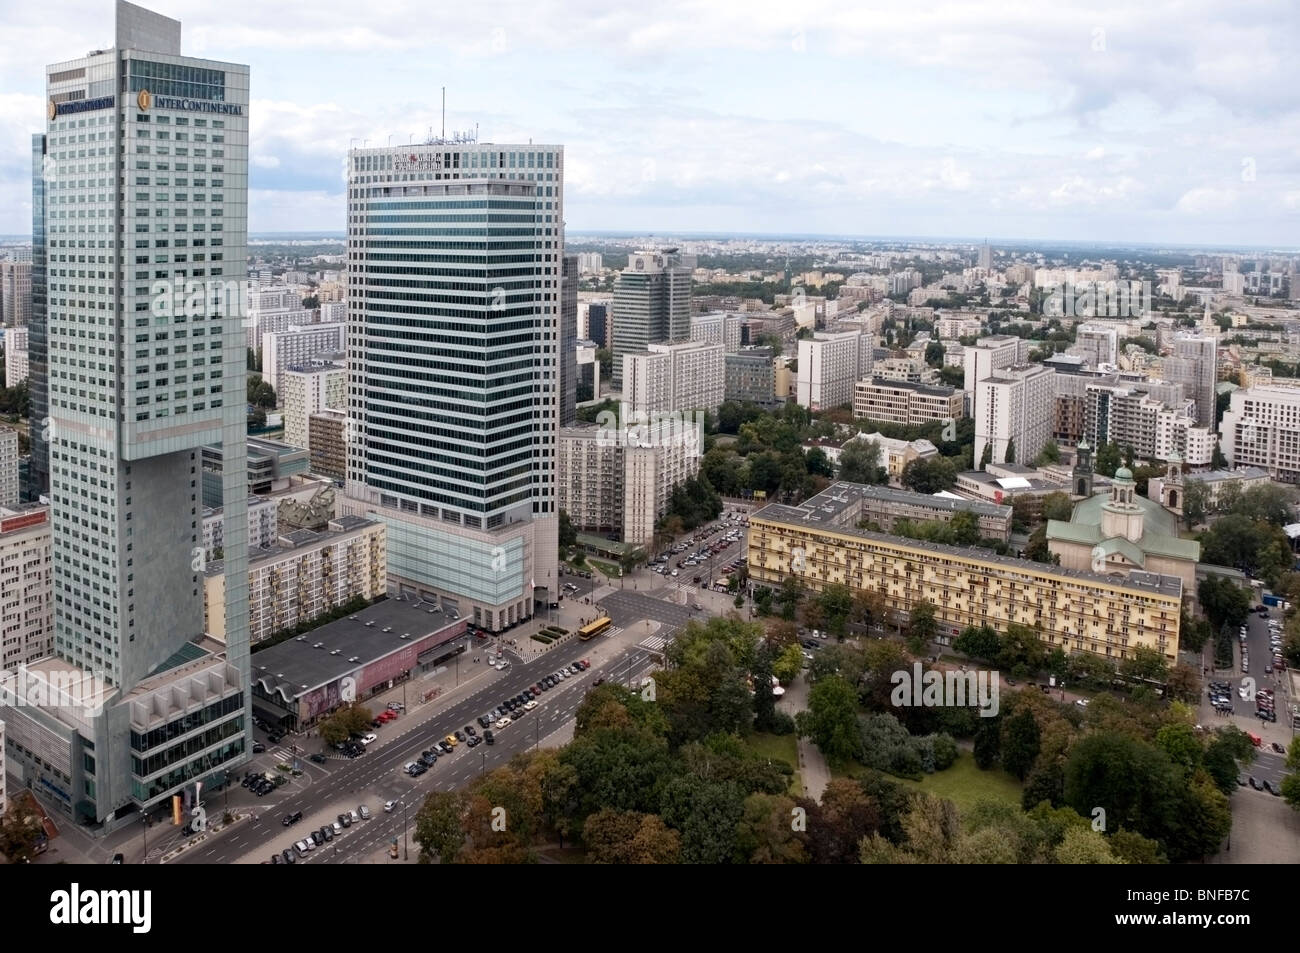 Arial view of Intercontinental Hotel and residential Central city of Warsaw properties, Poland, EU Stock Photo